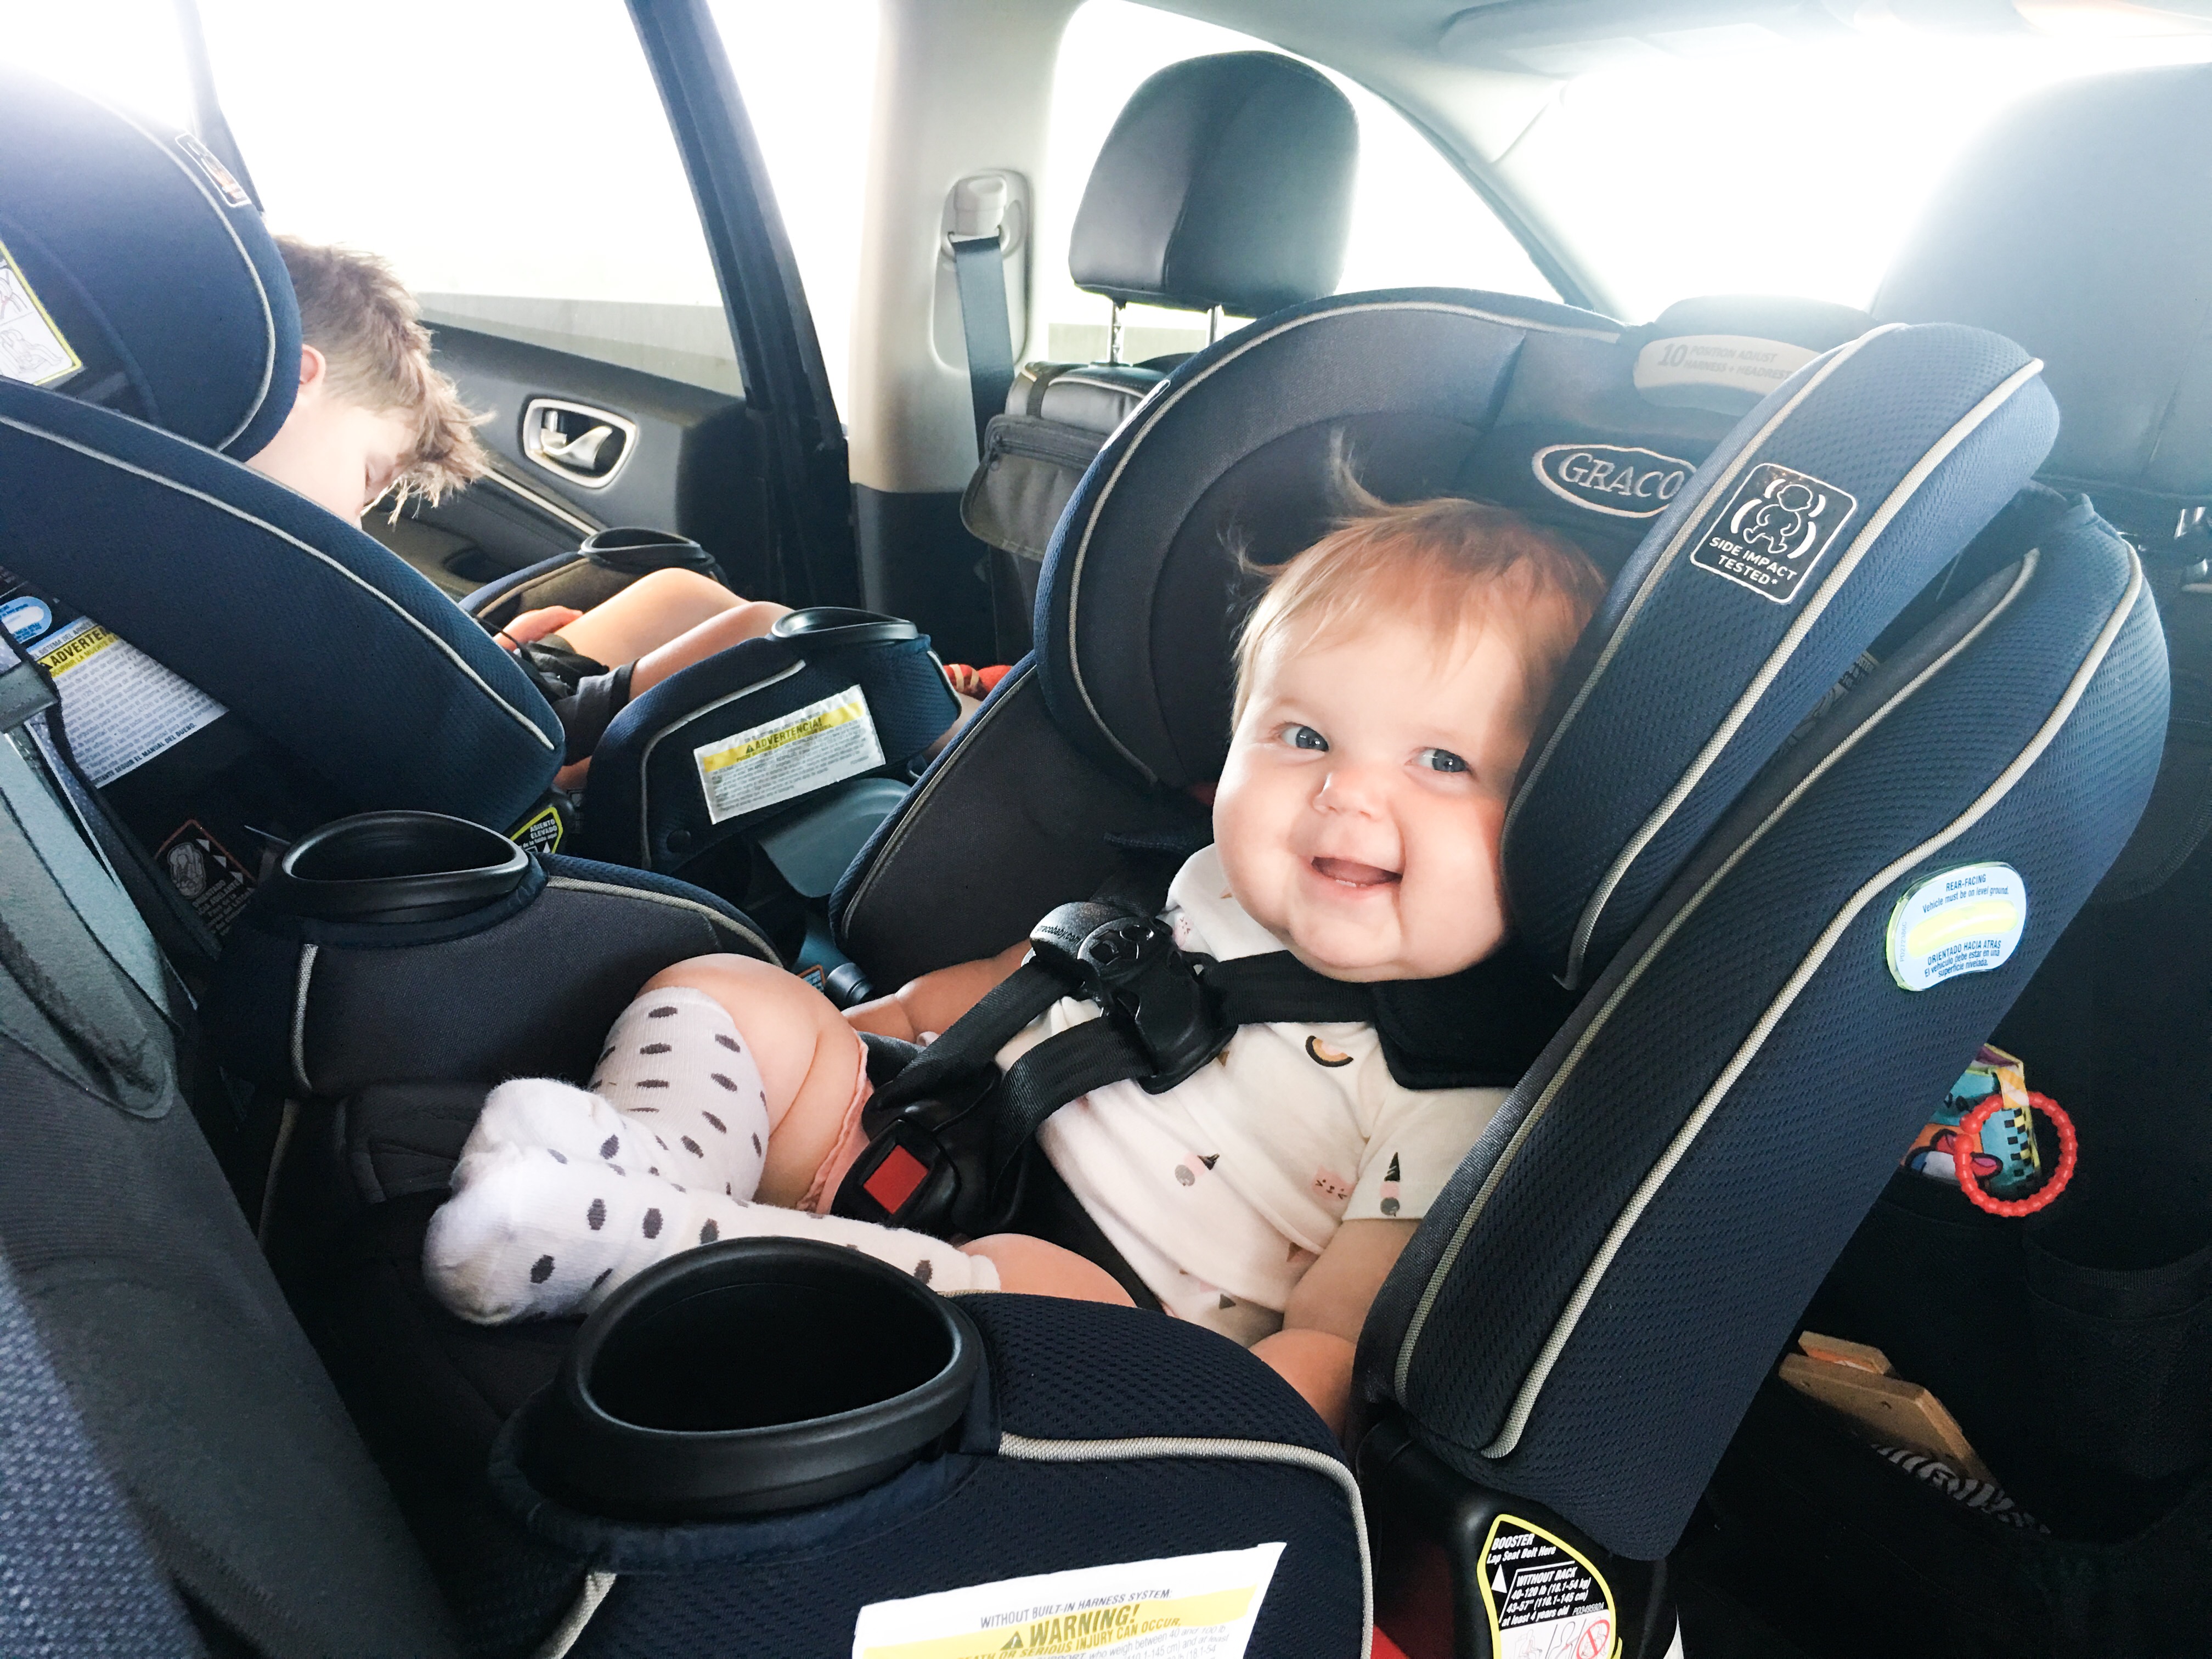 Protect Car from Kids: How to keep a new car nice with kids! As a mom of 2 little ones, keeping anything in good condition can be a challenge. Here are the strategies I'm using to protect my new car from kids while staying true to my own style. I'm keeping the car nice for me and making it comfortable for my babies with Graco 4Ever Extend2Fit Platinum car seats. Don't miss my Graco 4Ever car seat review!